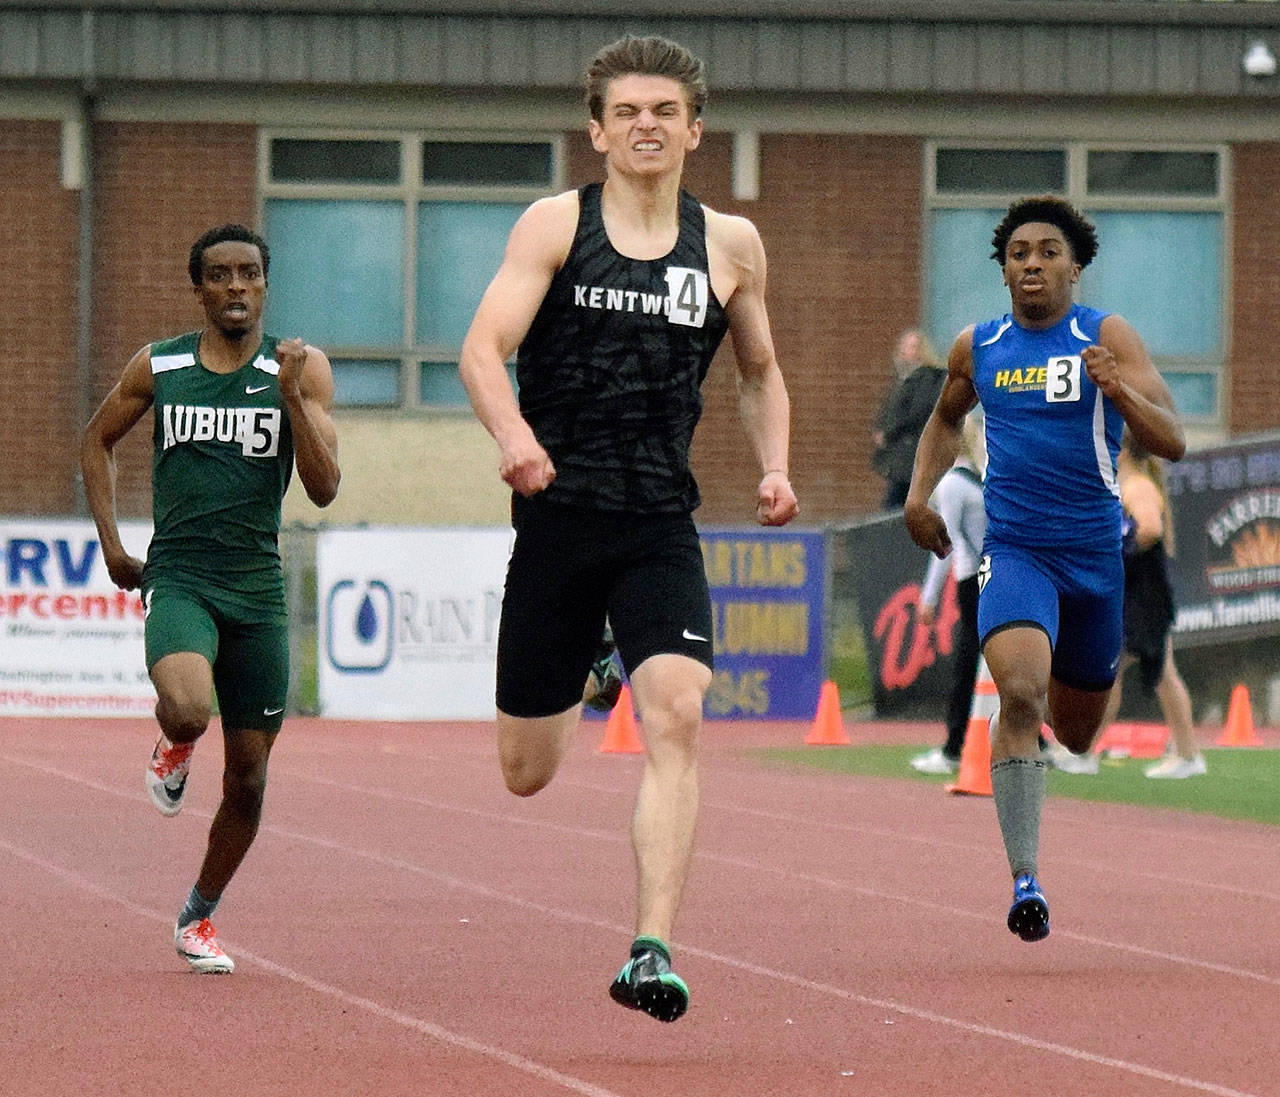 Kentwood’s Daniel Gaik darts to the finish line in his 400-meter heat at the bi-district meet on May 16. Gaik qualified for state with the second-best time of 49.62 seconds. RACHEL CIAMPI, Kent Reporter